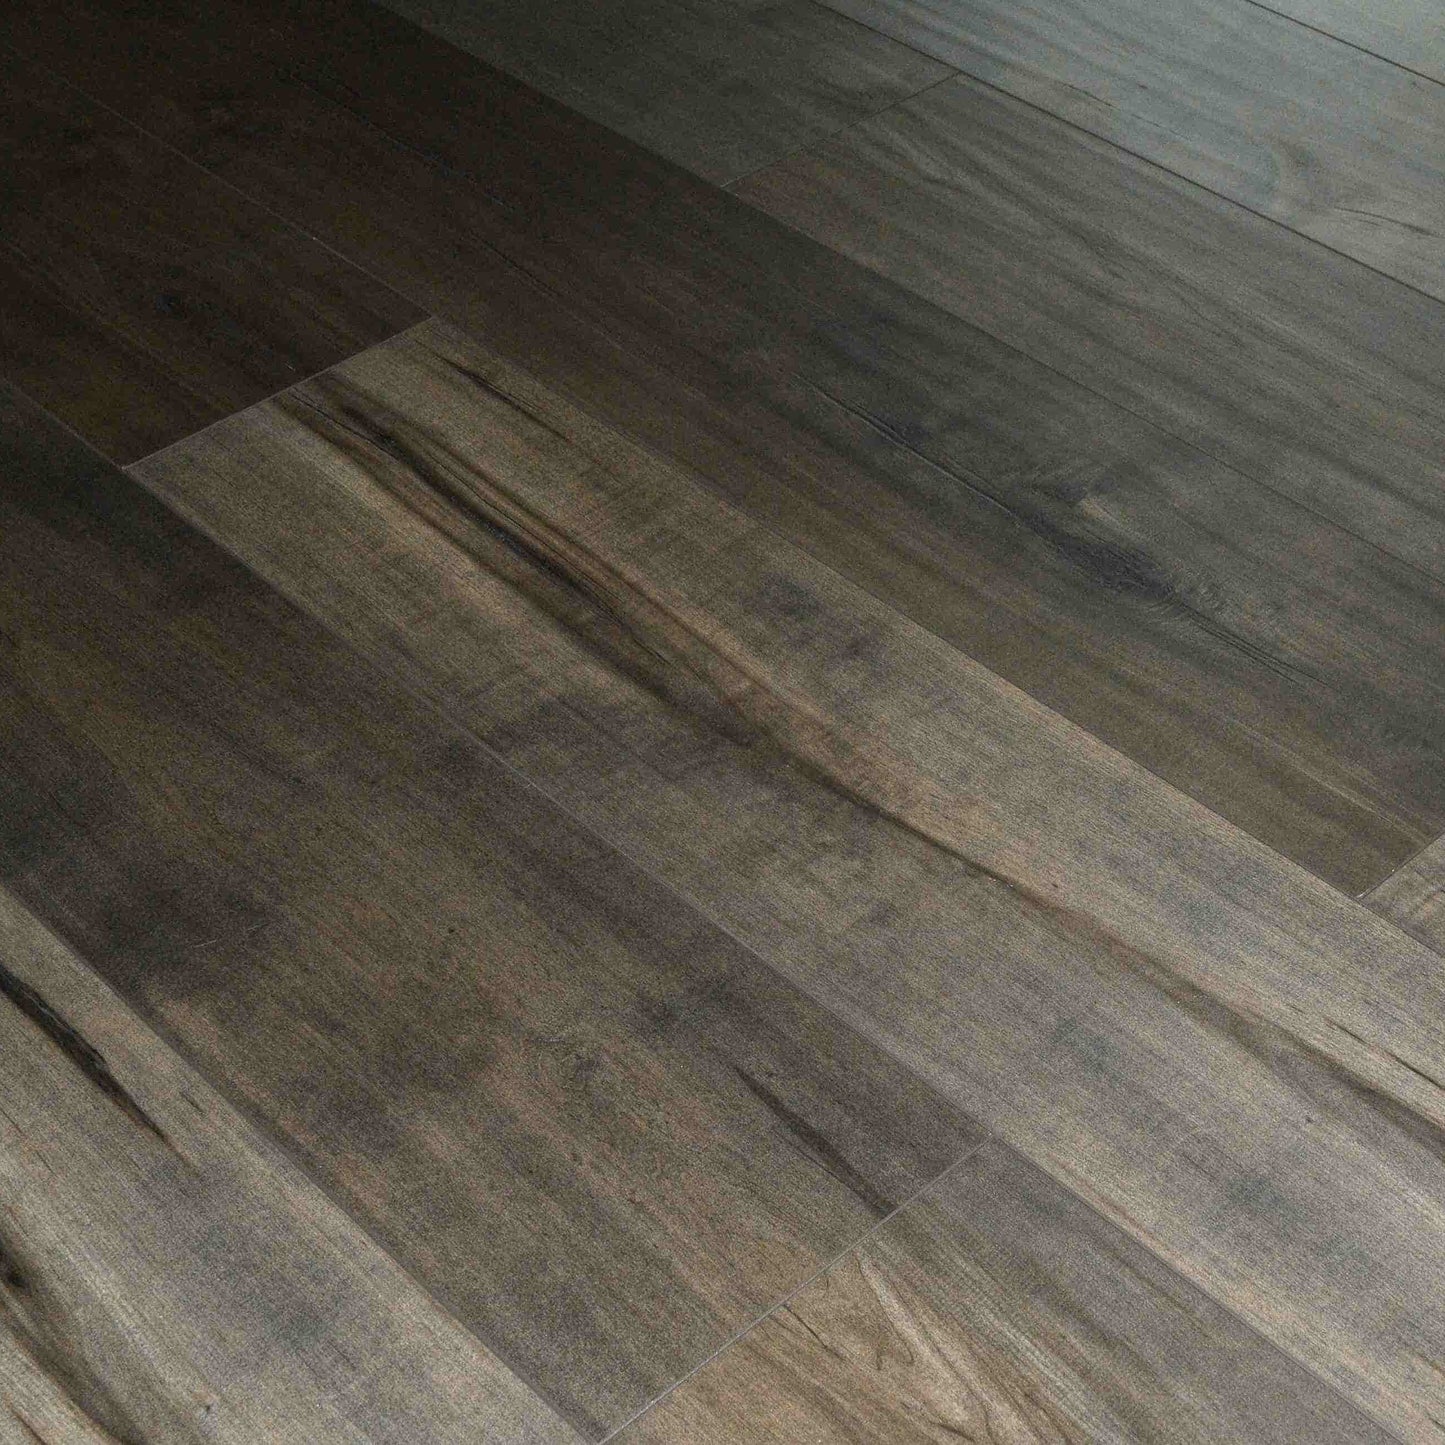 Natural Pine Laminate Collection - Roasted Brown Birch - 12mm AC4 (17.89 sqft/case)